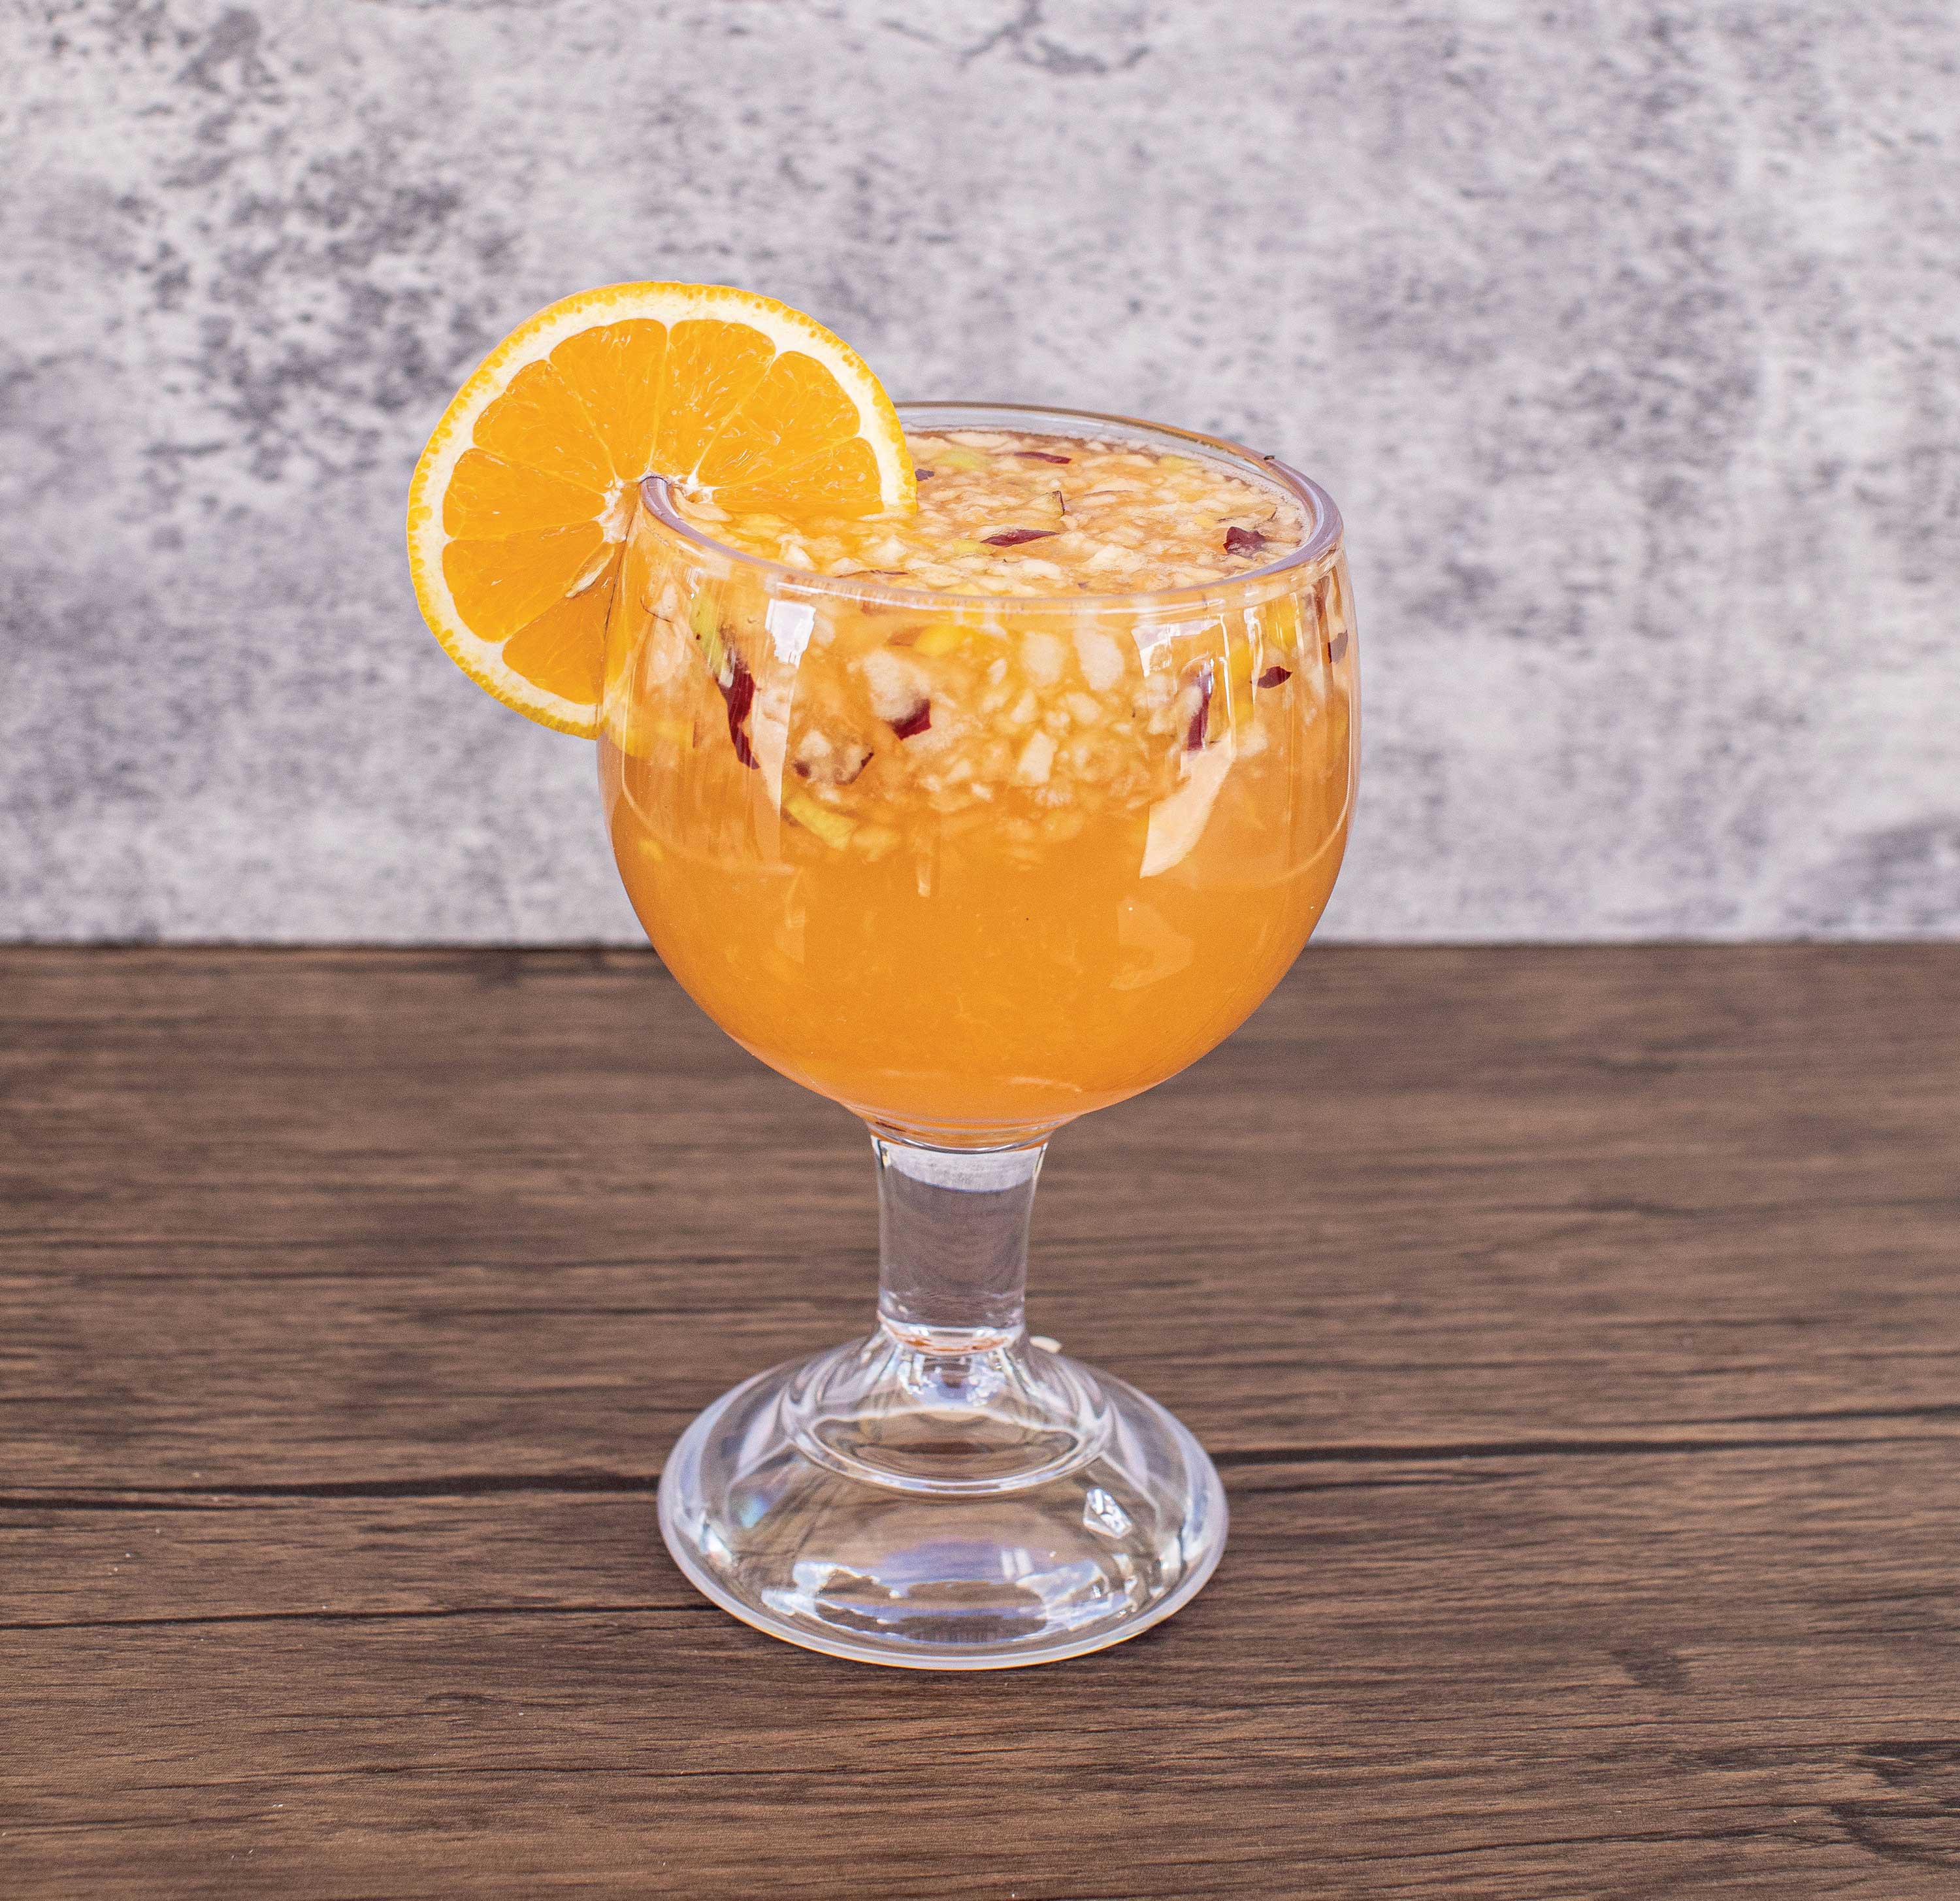 Image: A large glass is filled with an orange liquid mixed with bits of fruit. An orange slice is set on the glass rim.